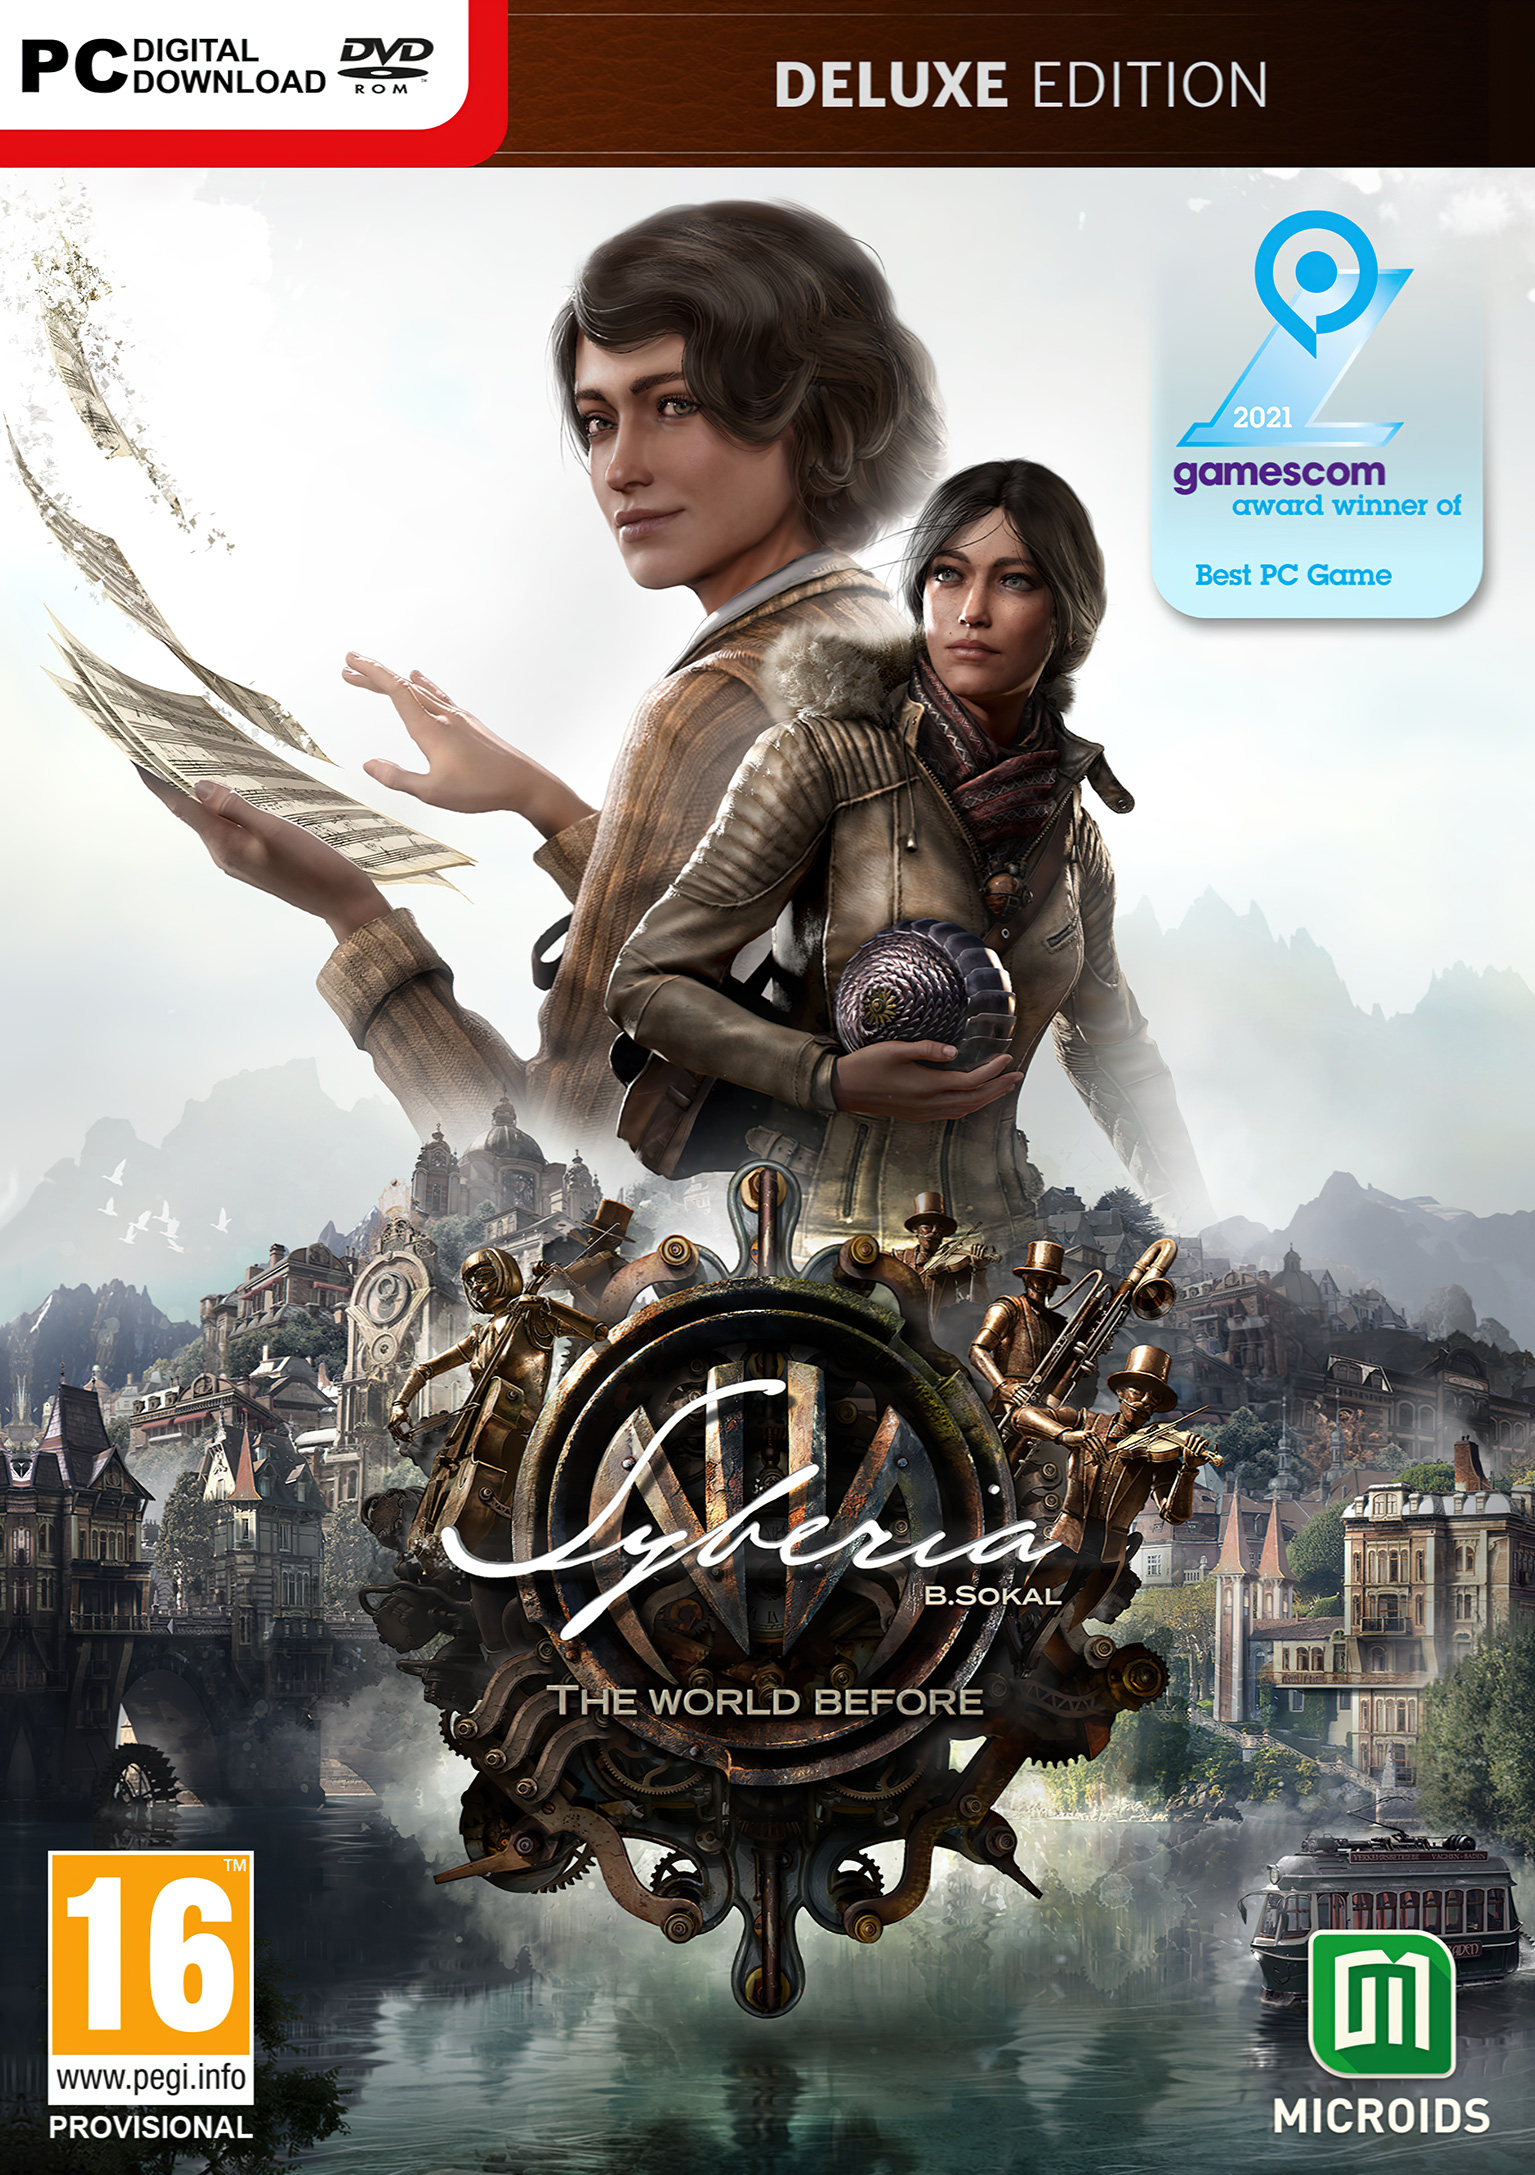 Syberia: The World Before - pedn DVD obal